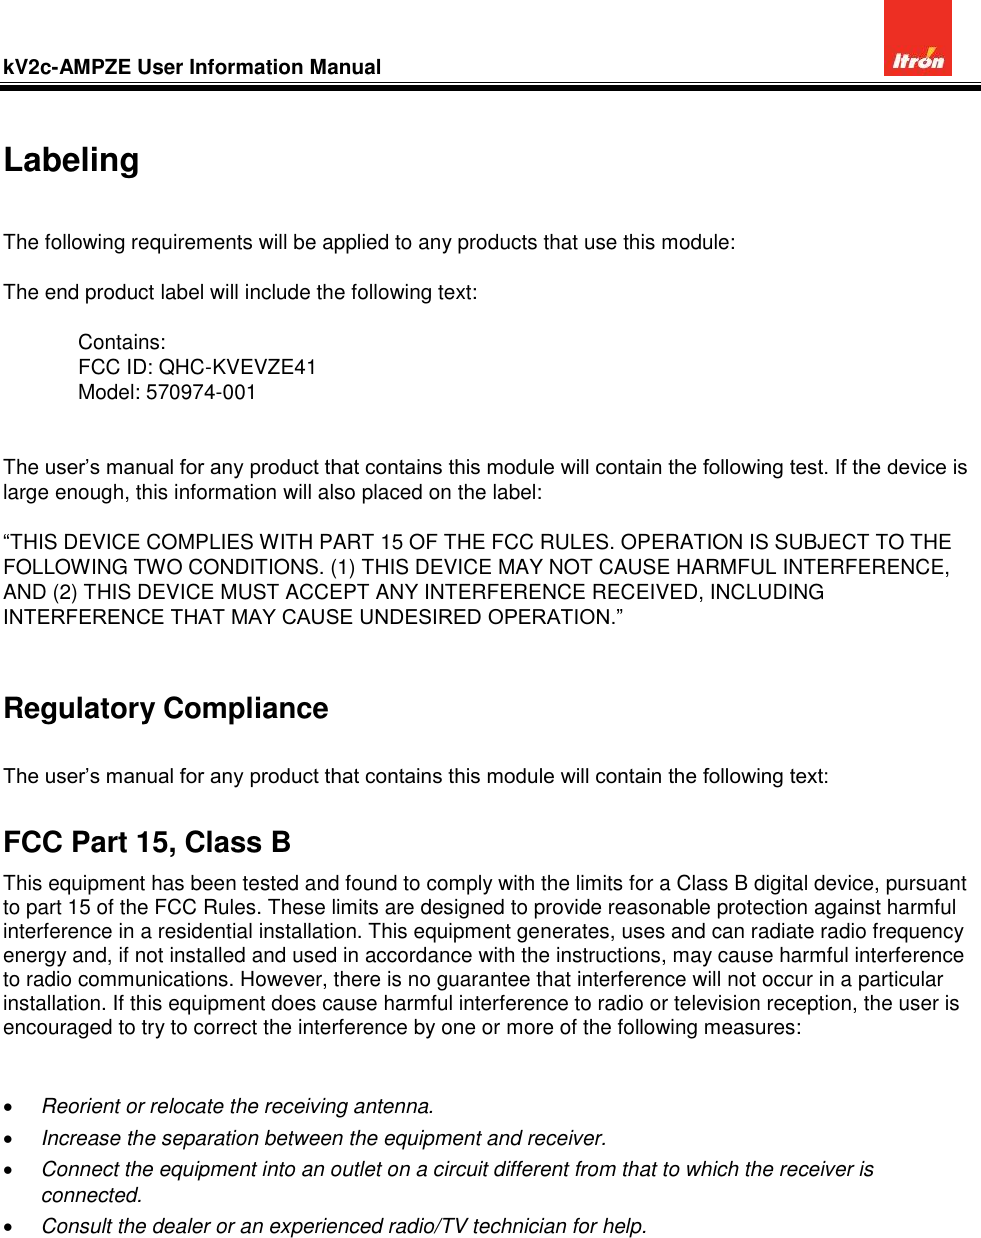 kV2c-AMPZE User Information Manual           Labeling  The following requirements will be applied to any products that use this module:  The end product label will include the following text:    Contains:   FCC ID: QHC-KVEVZE41   Model: 570974-001   The user’s manual for any product that contains this module will contain the following test. If the device is large enough, this information will also placed on the label:  “THIS DEVICE COMPLIES WITH PART 15 OF THE FCC RULES. OPERATION IS SUBJECT TO THE FOLLOWING TWO CONDITIONS. (1) THIS DEVICE MAY NOT CAUSE HARMFUL INTERFERENCE, AND (2) THIS DEVICE MUST ACCEPT ANY INTERFERENCE RECEIVED, INCLUDING INTERFERENCE THAT MAY CAUSE UNDESIRED OPERATION.”  Regulatory Compliance  The user’s manual for any product that contains this module will contain the following text: FCC Part 15, Class B This equipment has been tested and found to comply with the limits for a Class B digital device, pursuant to part 15 of the FCC Rules. These limits are designed to provide reasonable protection against harmful interference in a residential installation. This equipment generates, uses and can radiate radio frequency energy and, if not installed and used in accordance with the instructions, may cause harmful interference to radio communications. However, there is no guarantee that interference will not occur in a particular installation. If this equipment does cause harmful interference to radio or television reception, the user is encouraged to try to correct the interference by one or more of the following measures:    Reorient or relocate the receiving antenna.  Increase the separation between the equipment and receiver.  Connect the equipment into an outlet on a circuit different from that to which the receiver is connected.  Consult the dealer or an experienced radio/TV technician for help.       